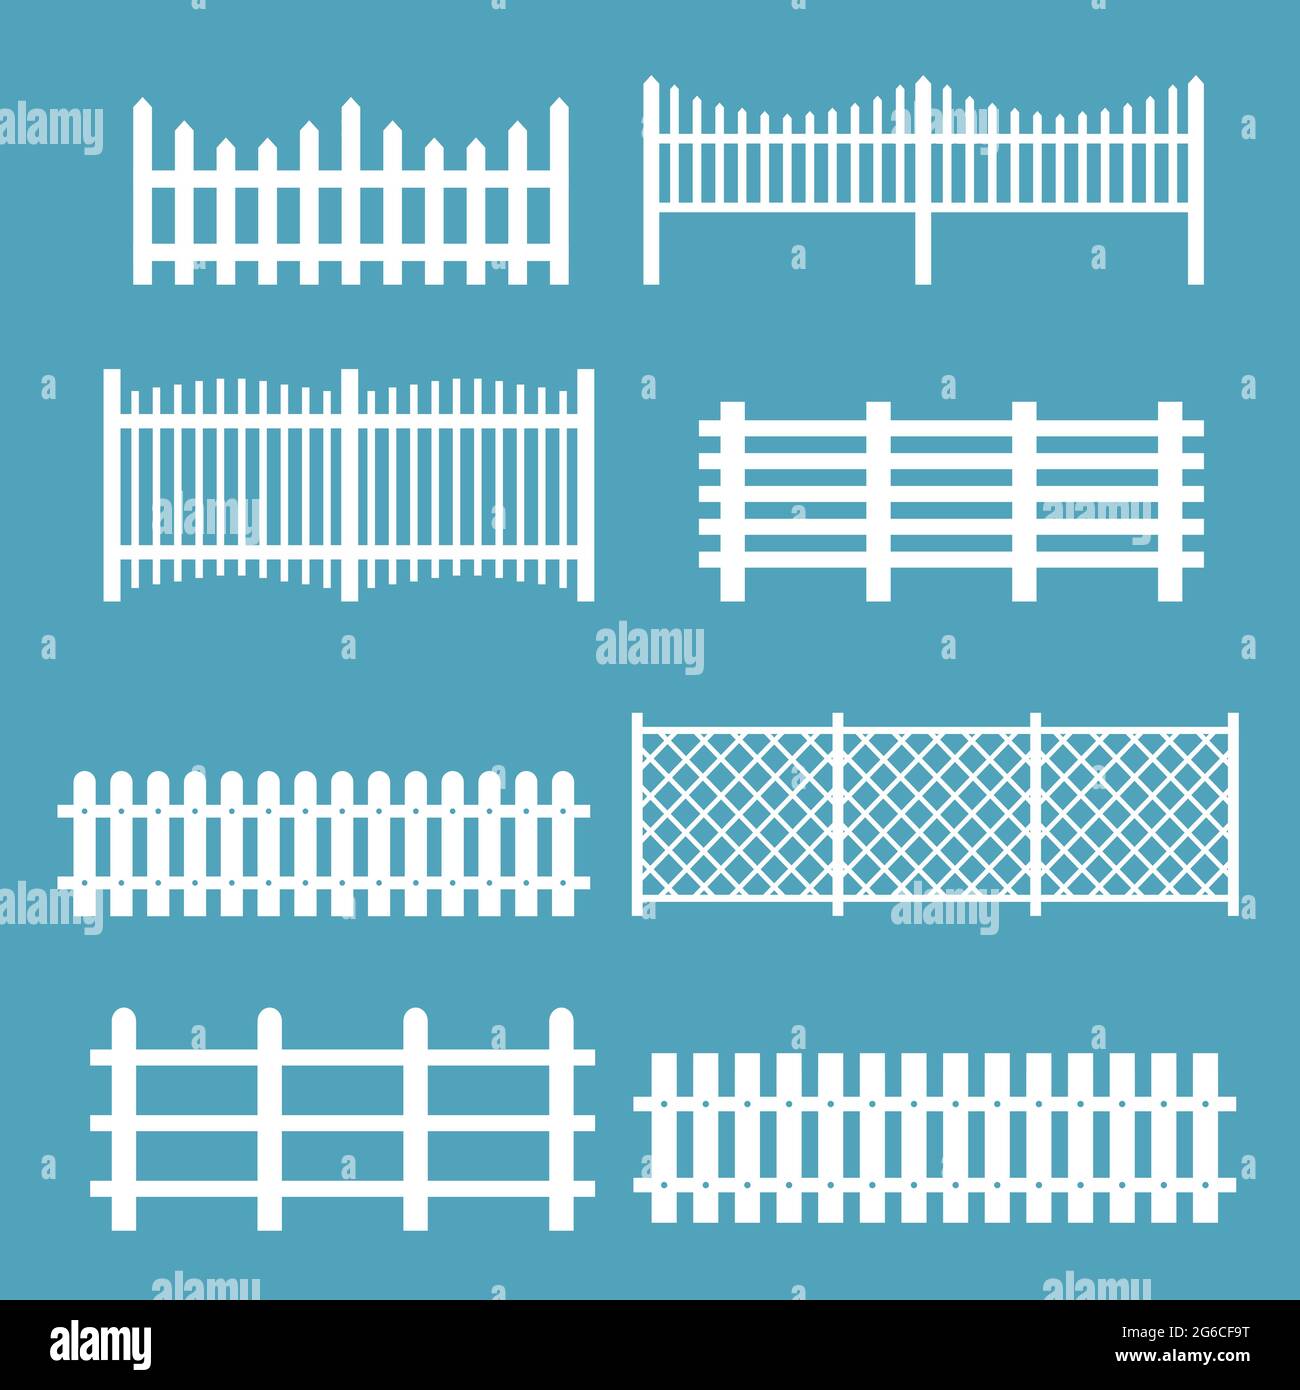 Vector illustration set of different fences white color. Rural silhouettes wooden fences, pickets vector for garden in flat style. Stock Vector